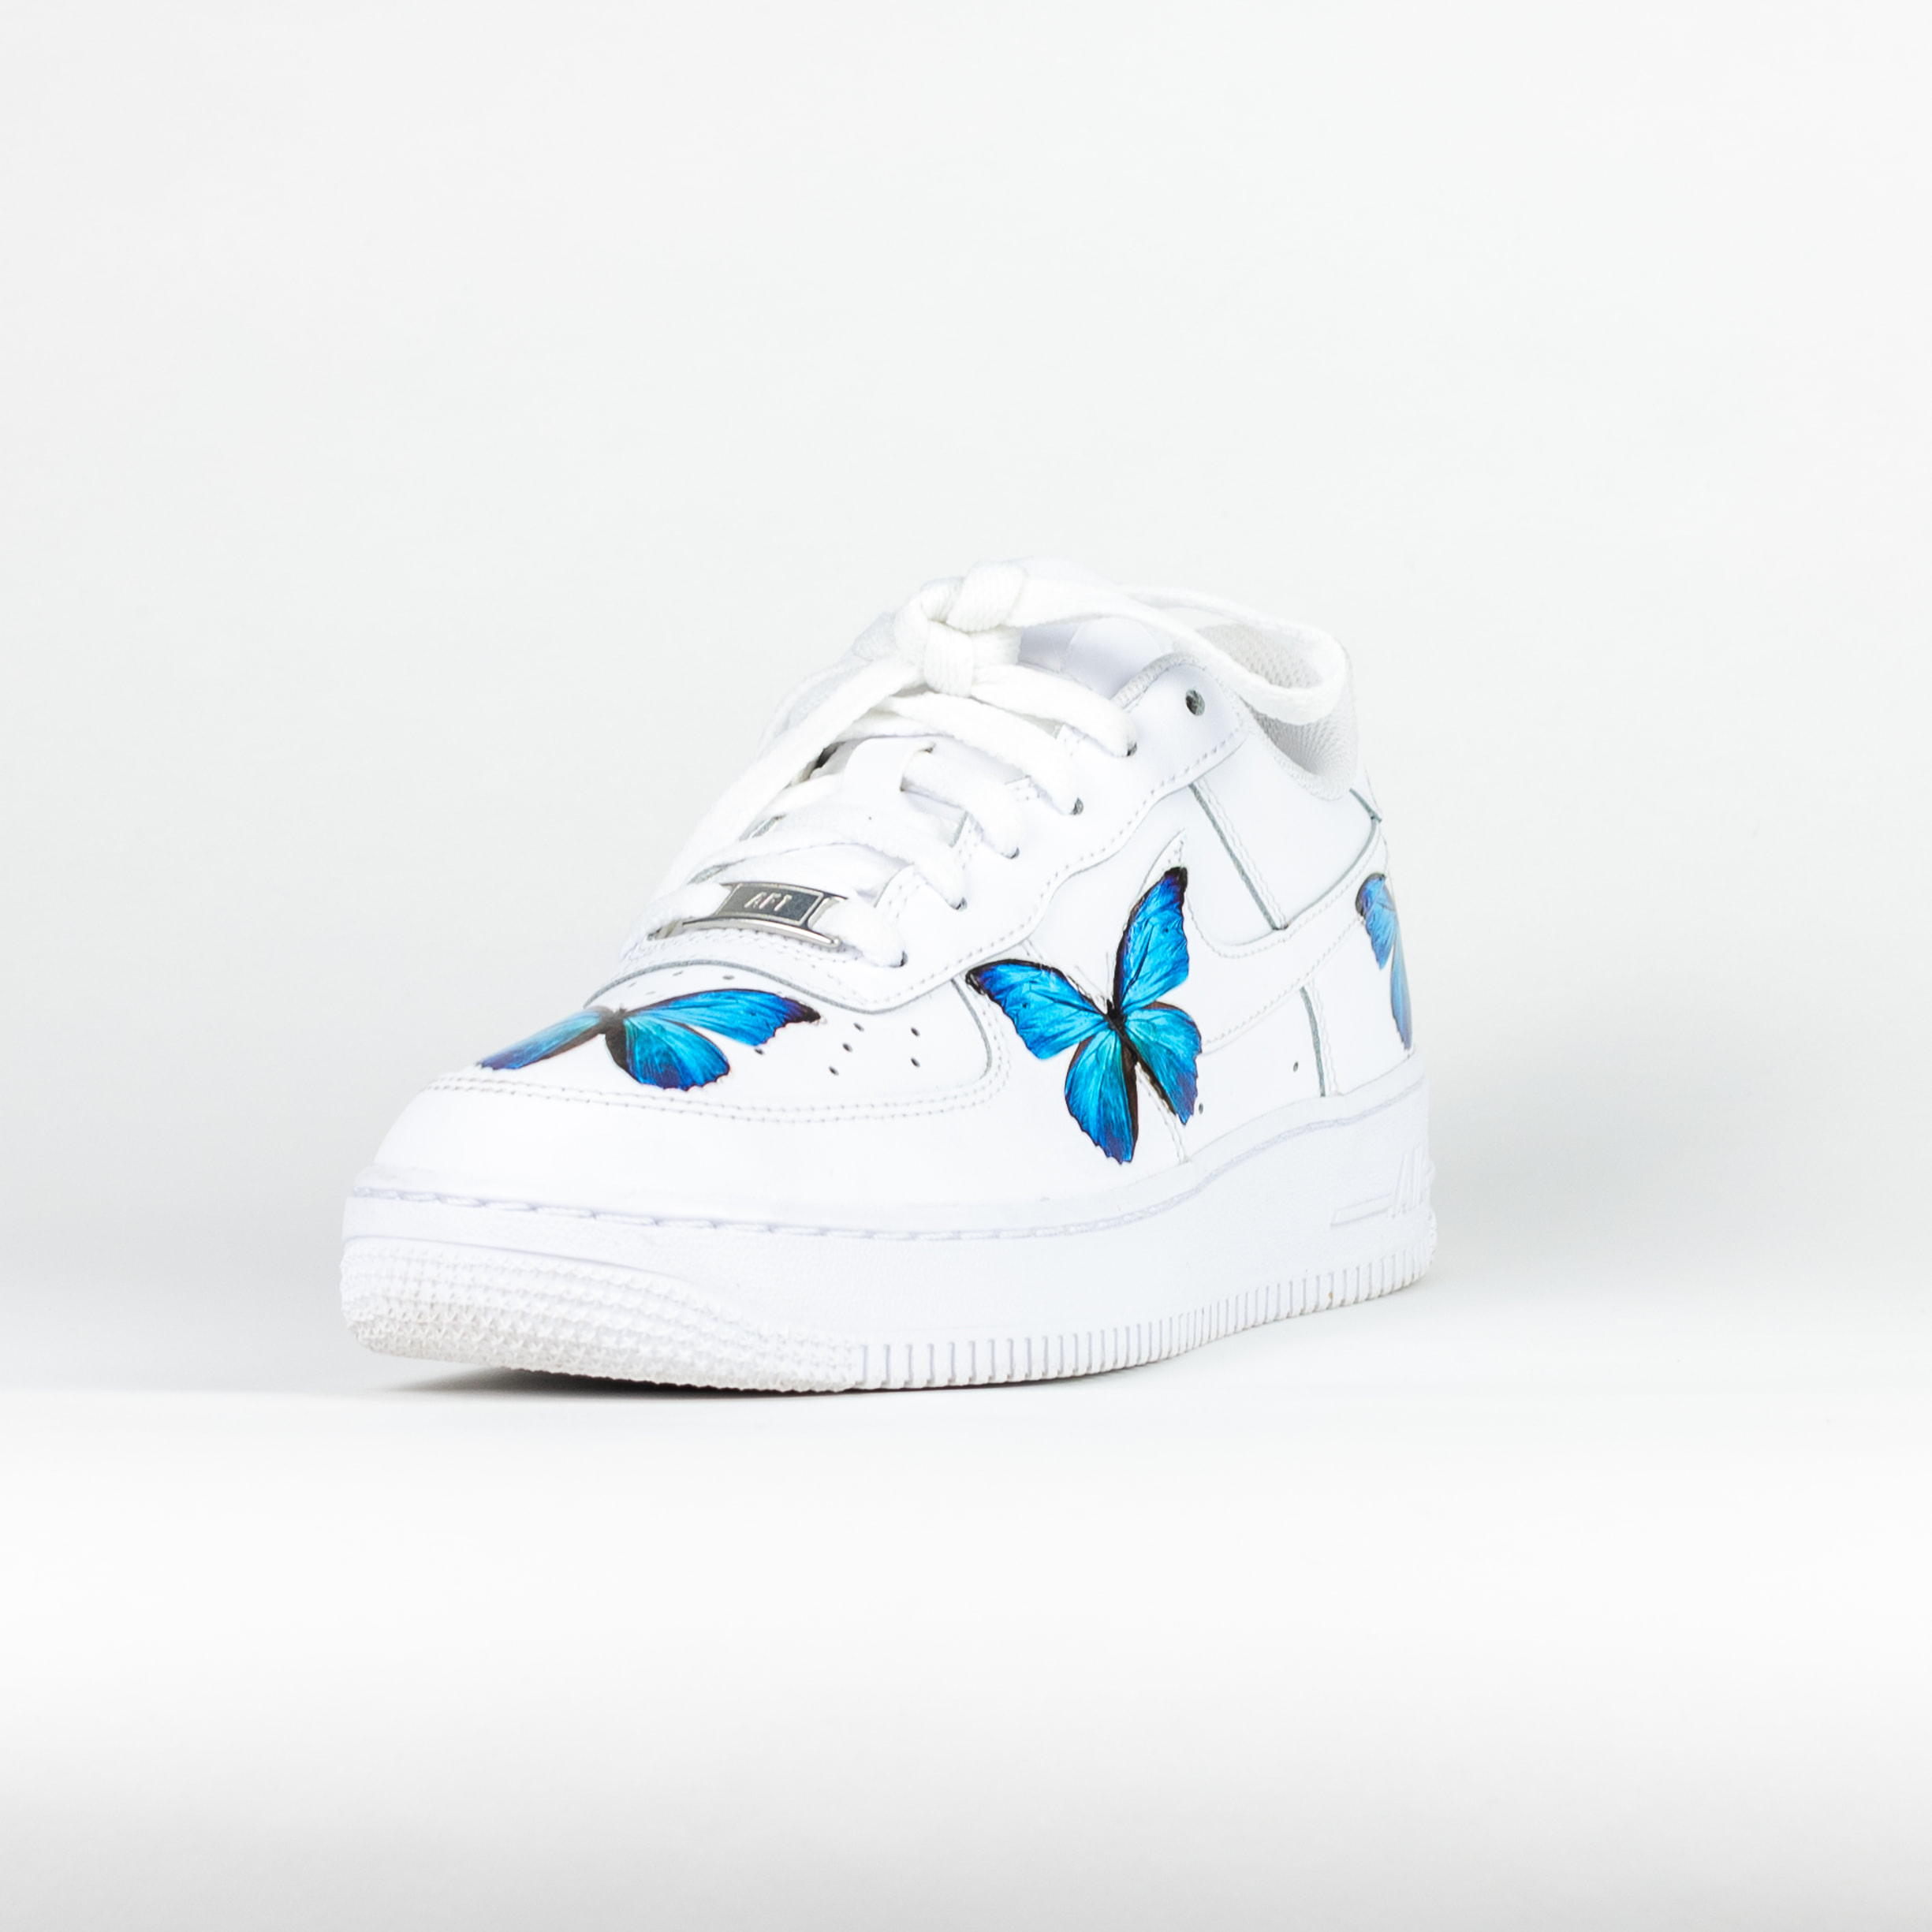 Nike Air Force 1 Sage Low Custom Shoes White Blue Butterfly Sneakers All  Sizes